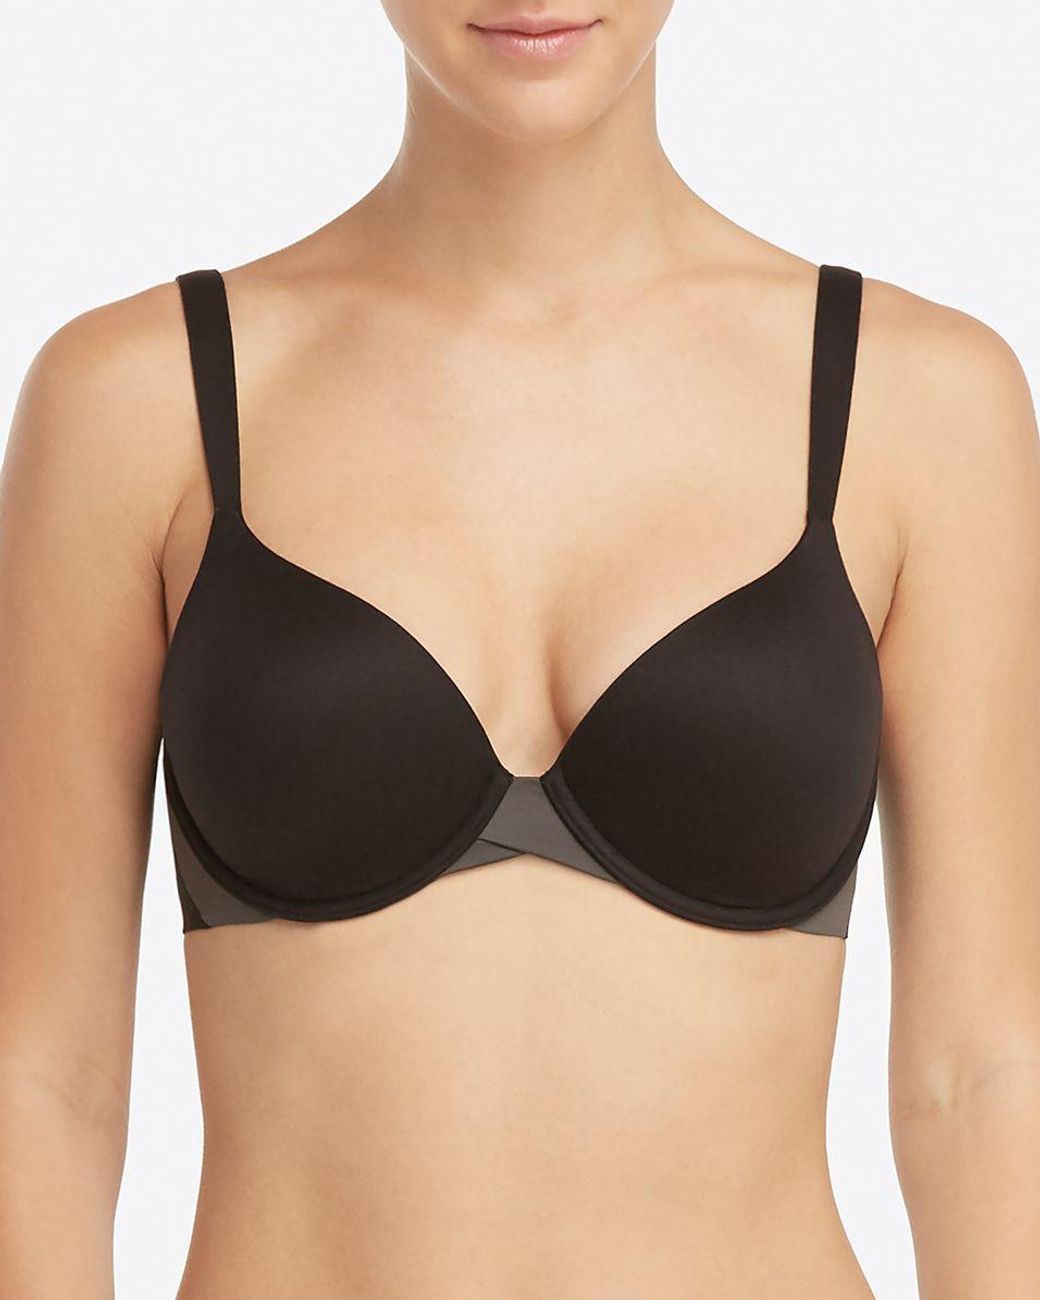 Pinky Review: Spanx Pillow Cup Signature Unlined Full Coverage Bra